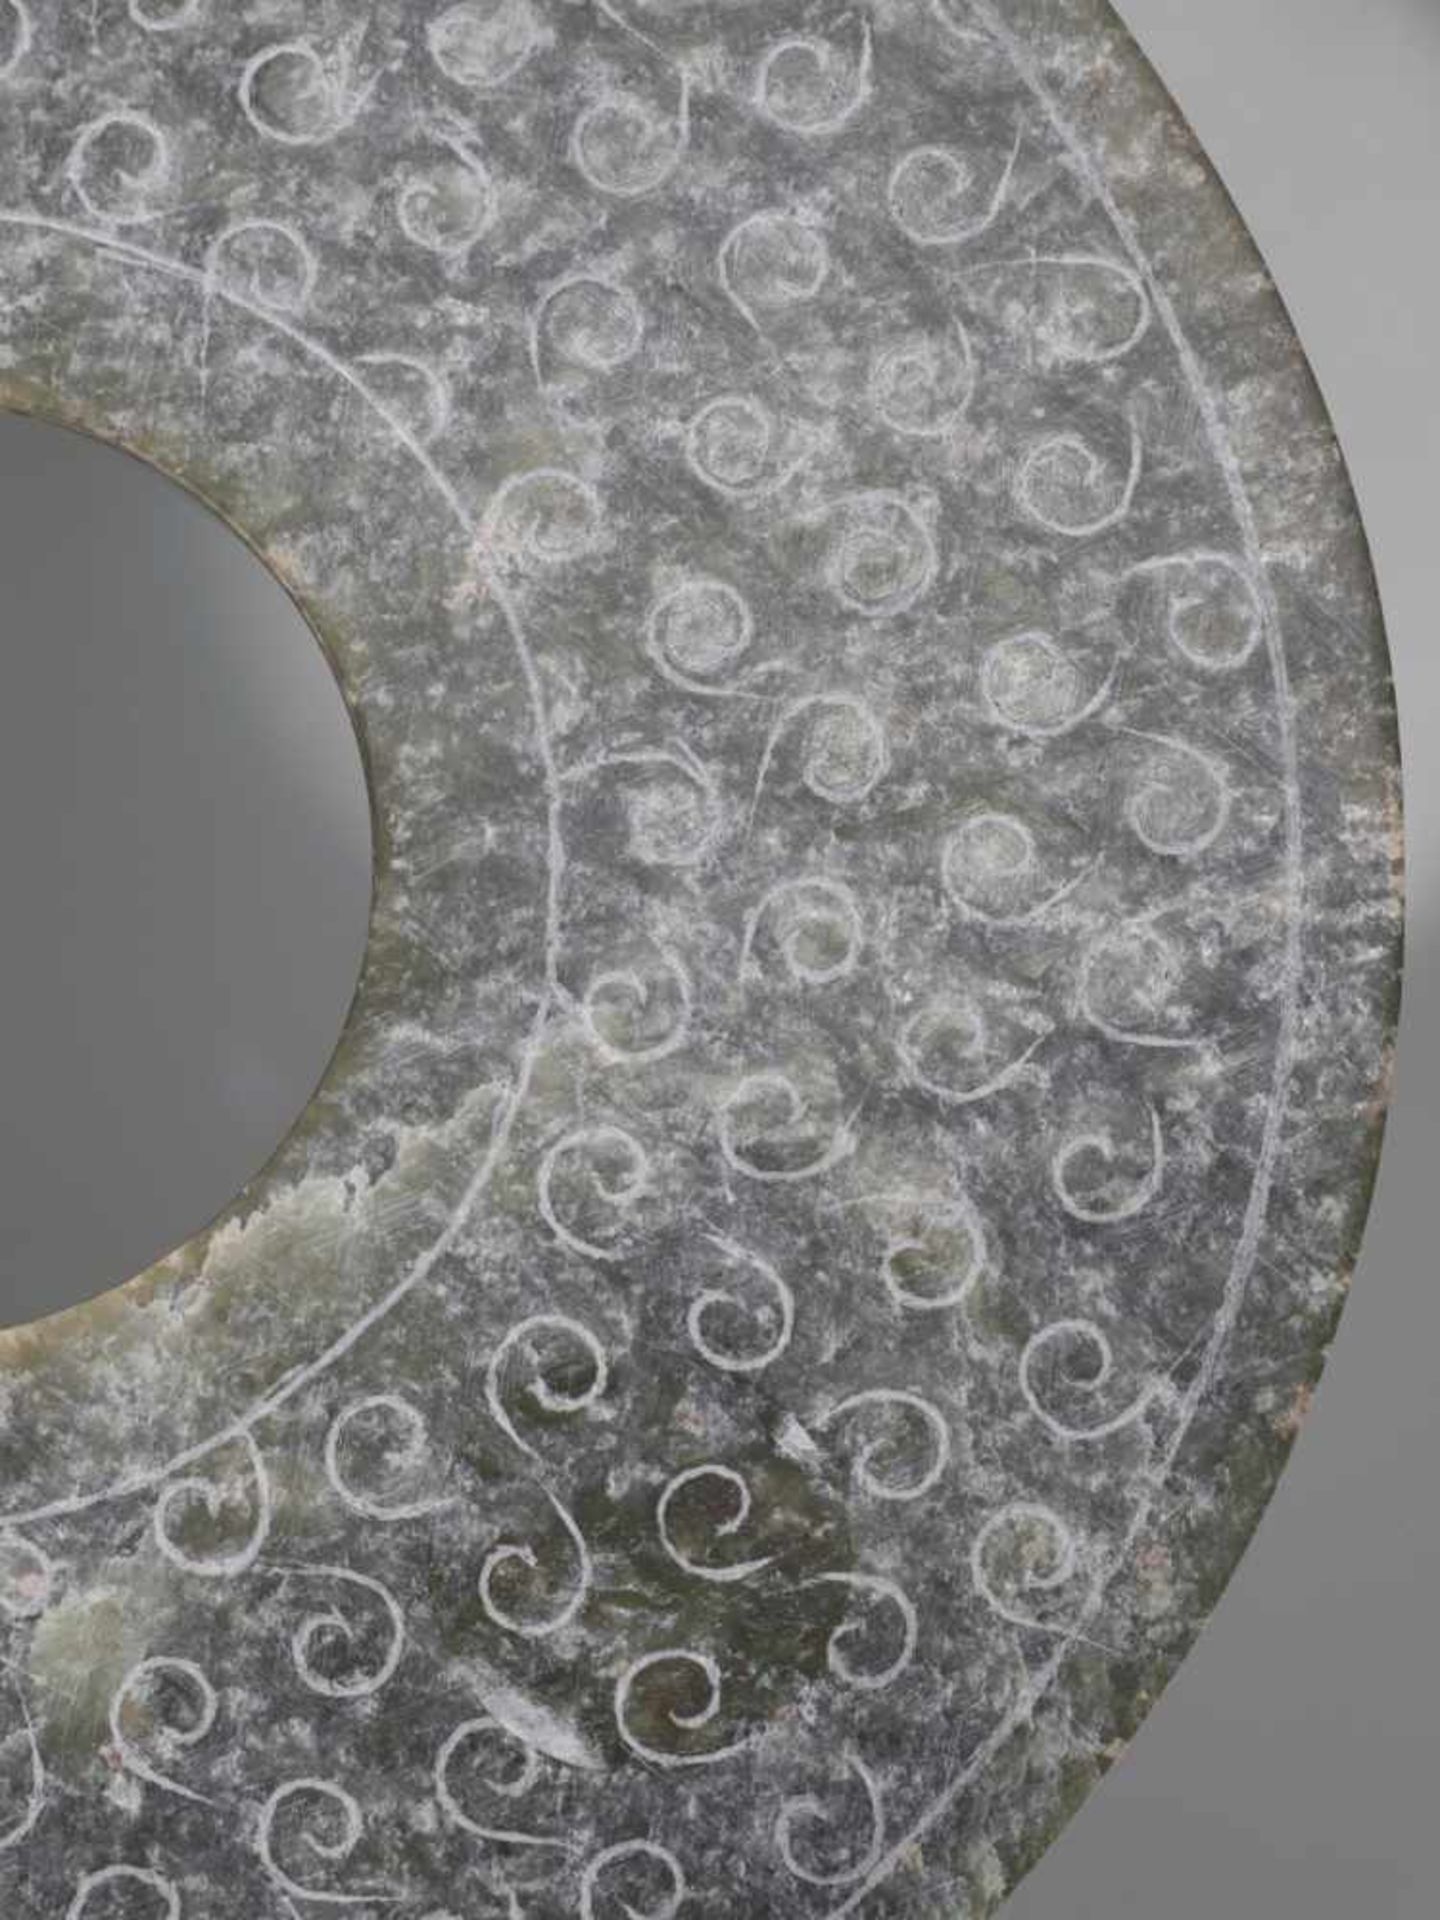 A REFINED CHARCOAL GREY DISC WITH ENGRAVED CURLS Jade. China, Han Dynasty, 2nd century BC 穀紋玉璧 - 漢代, - Bild 5 aus 8